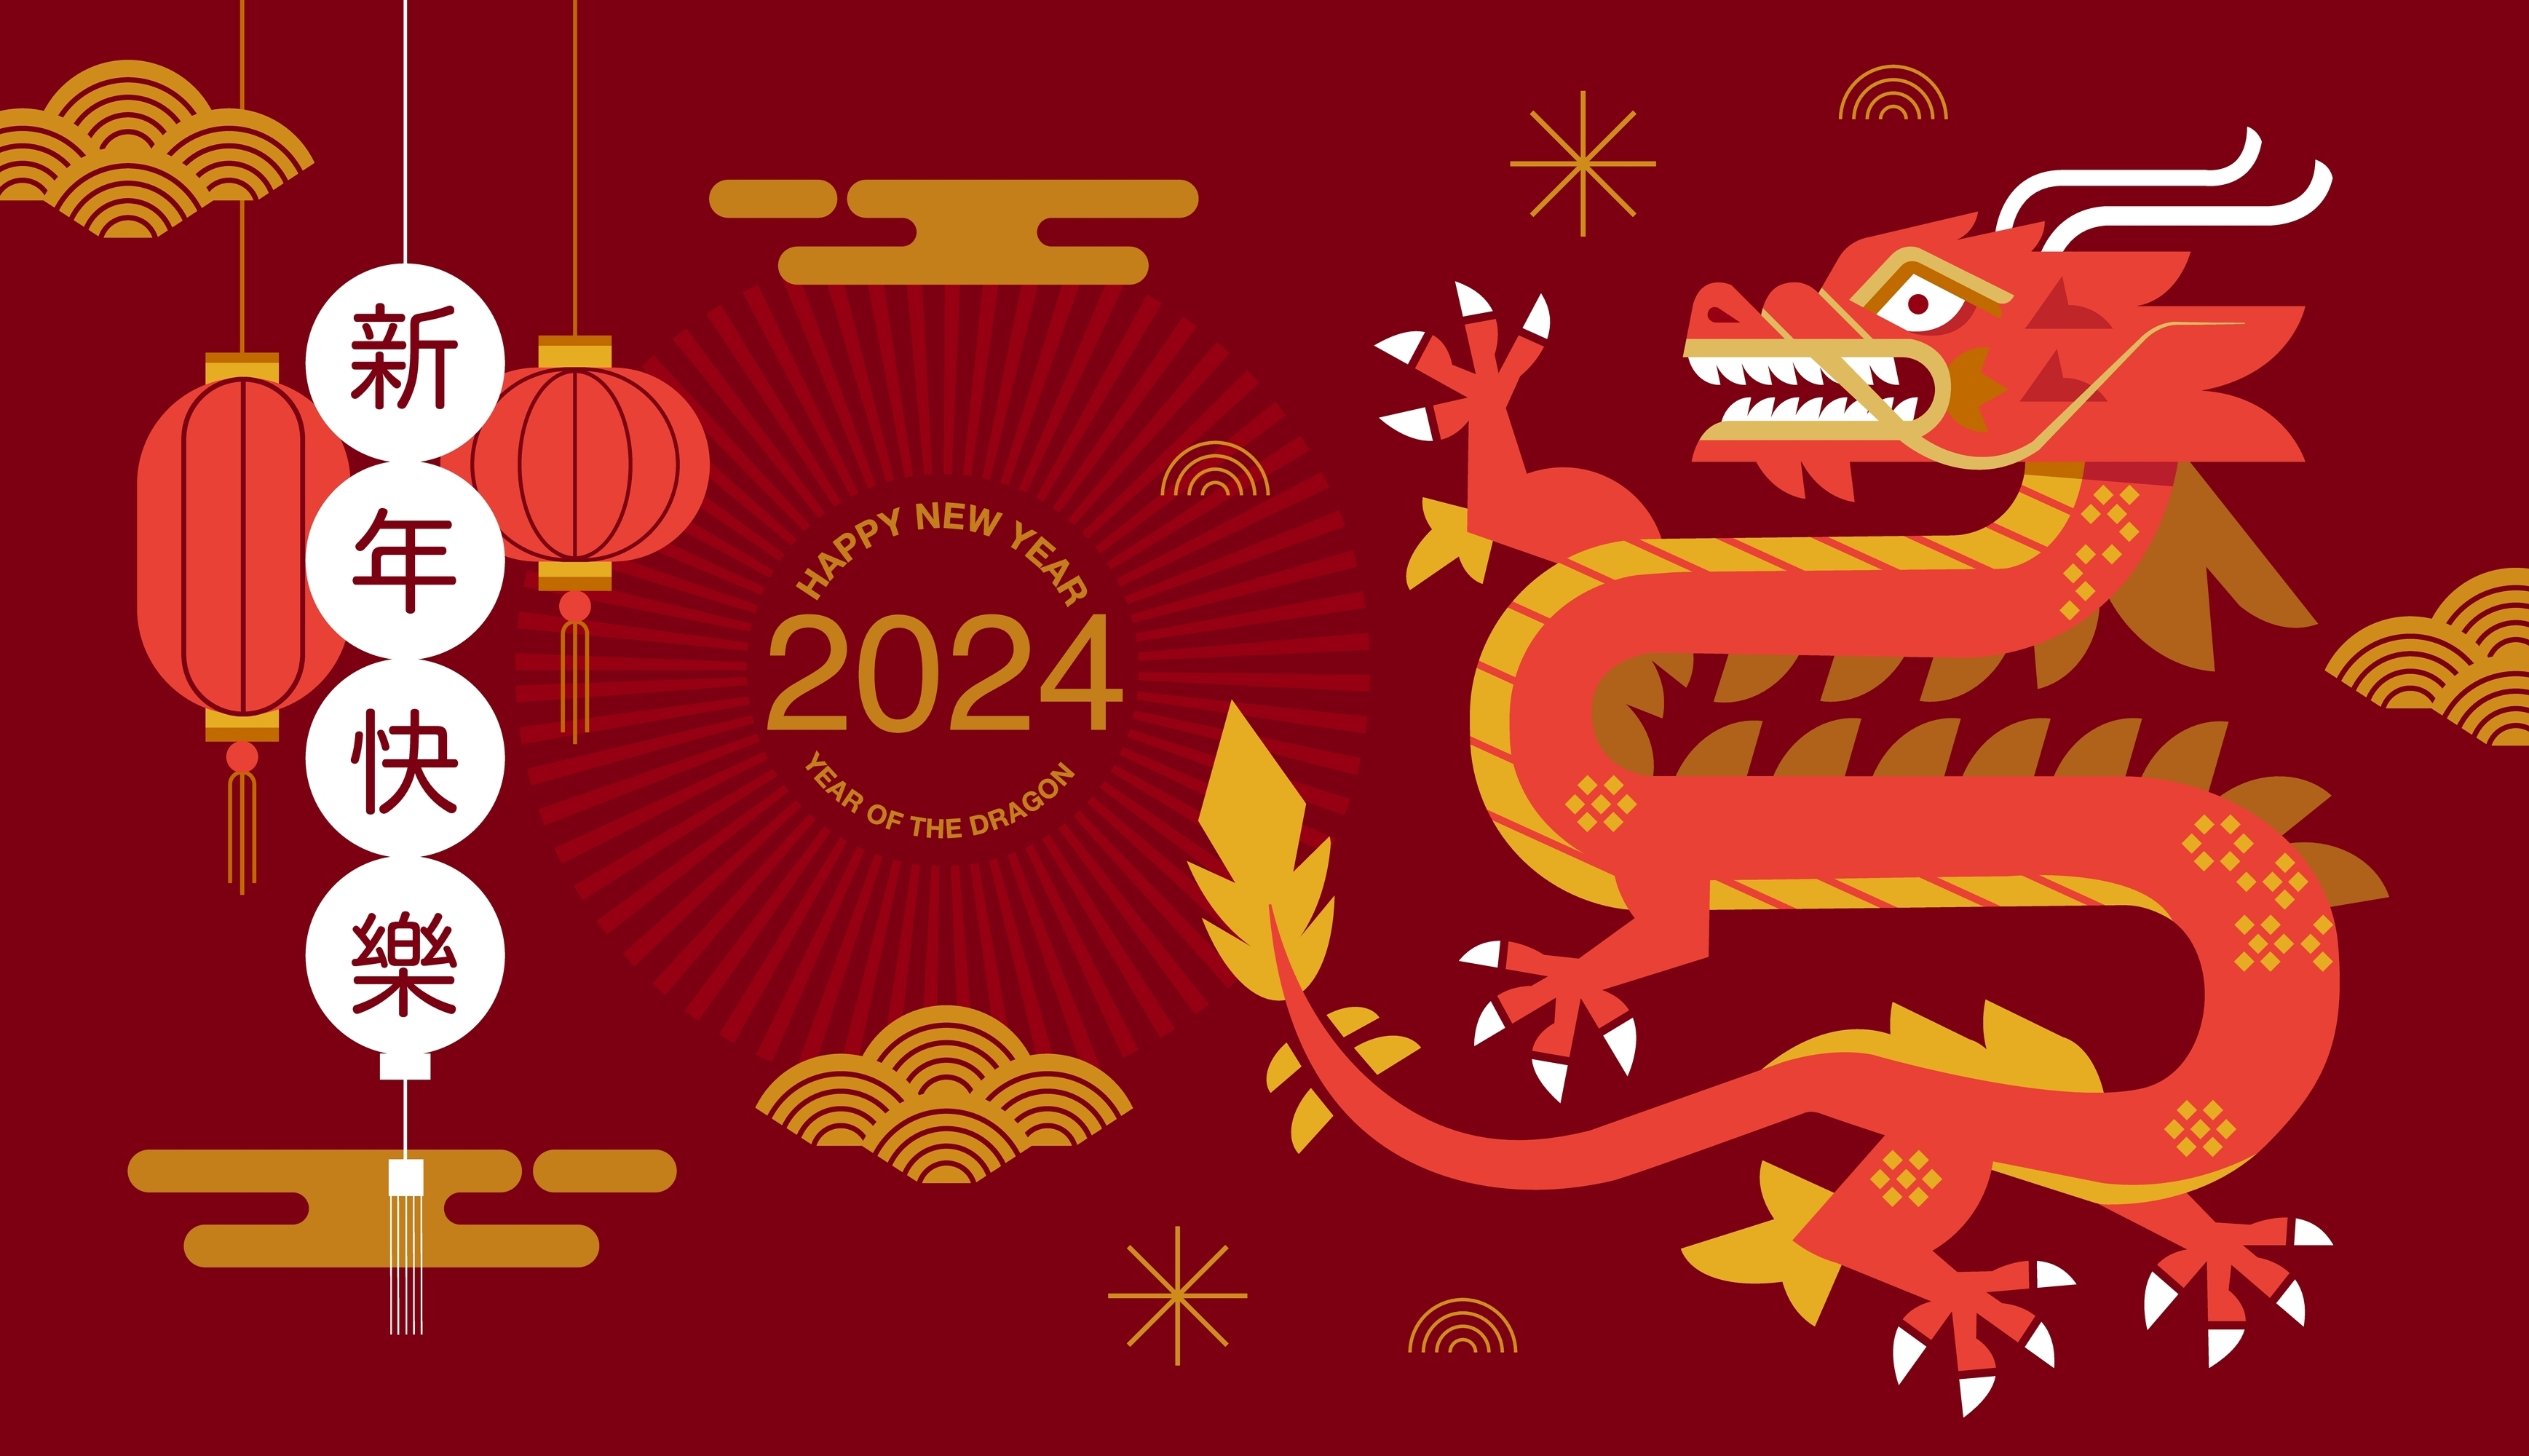 dragon against a red background with the words "Happy New Year 2024 Year of the Dragon"